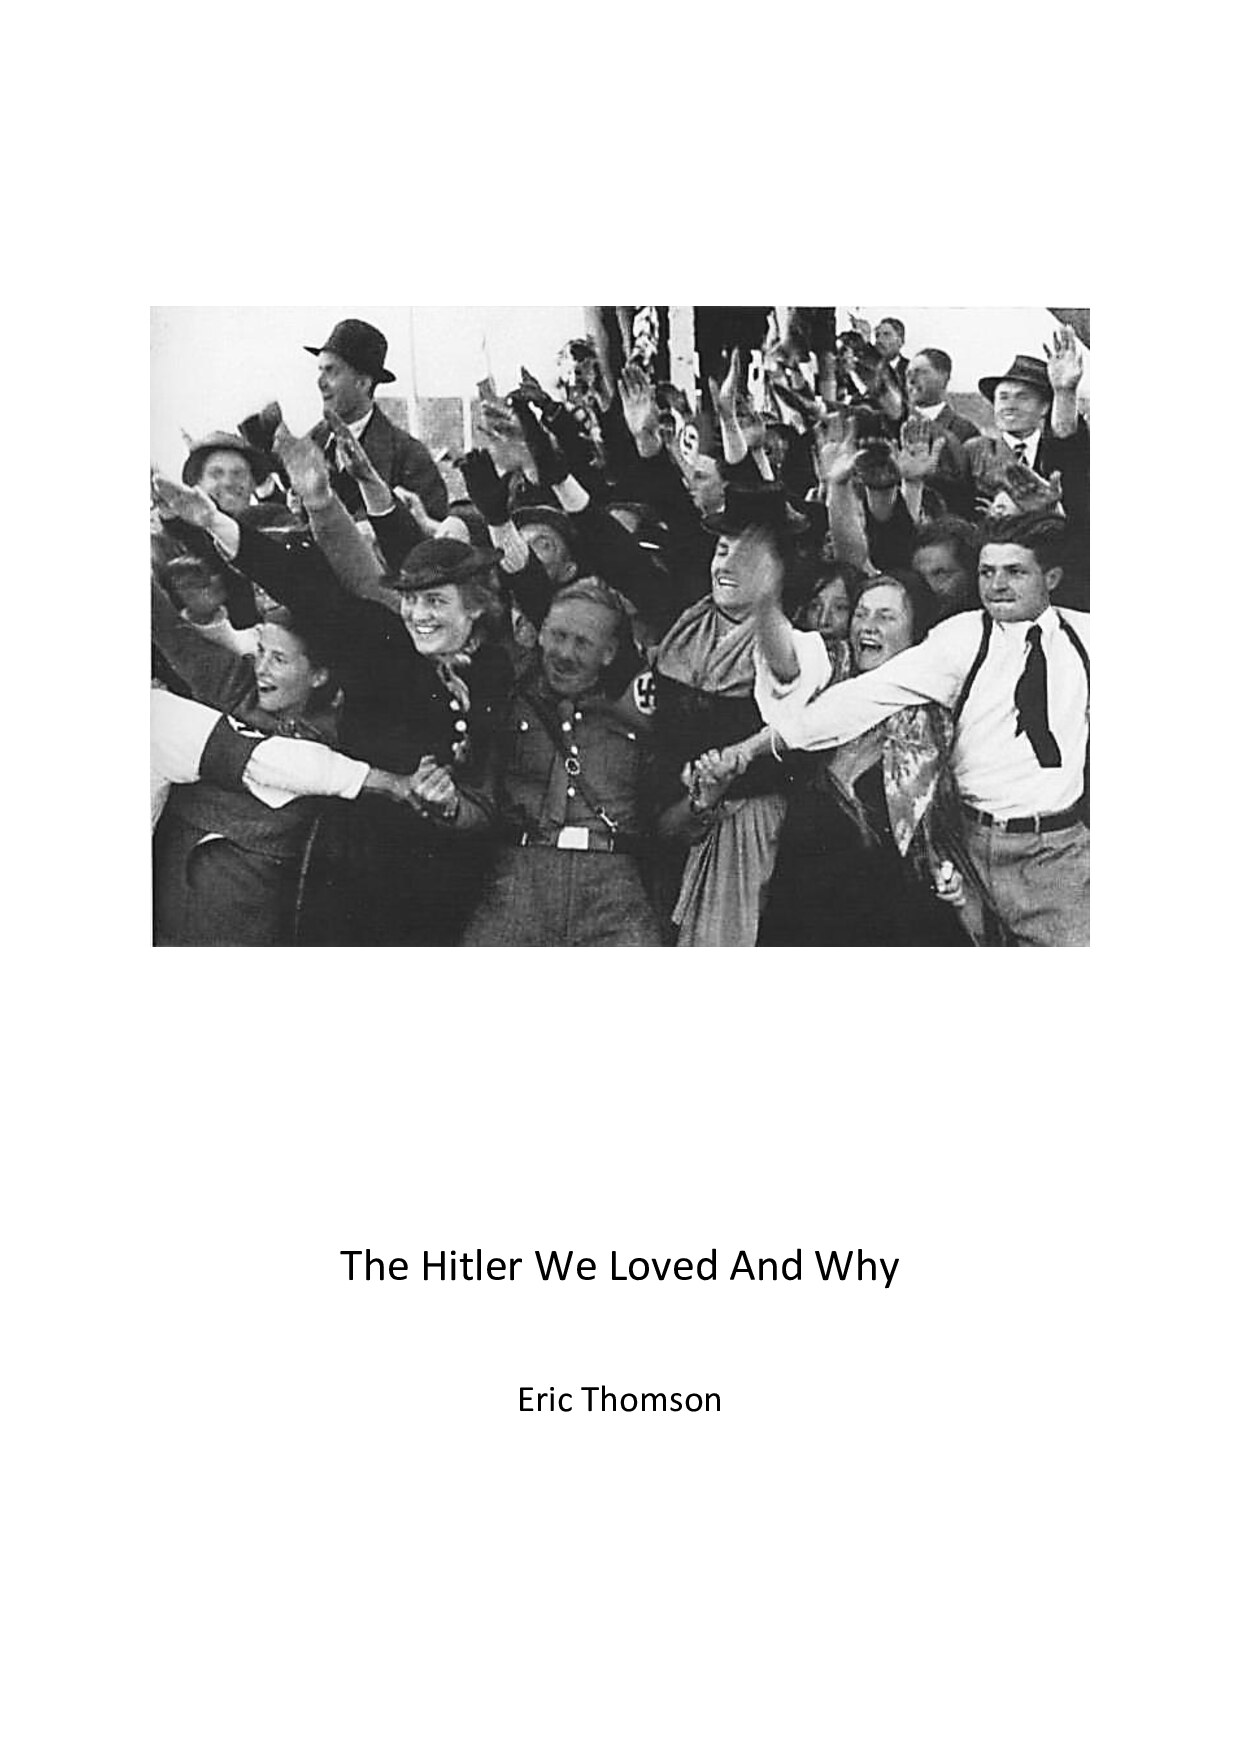 Thomson, Eric; The Hitler We Loved and Why